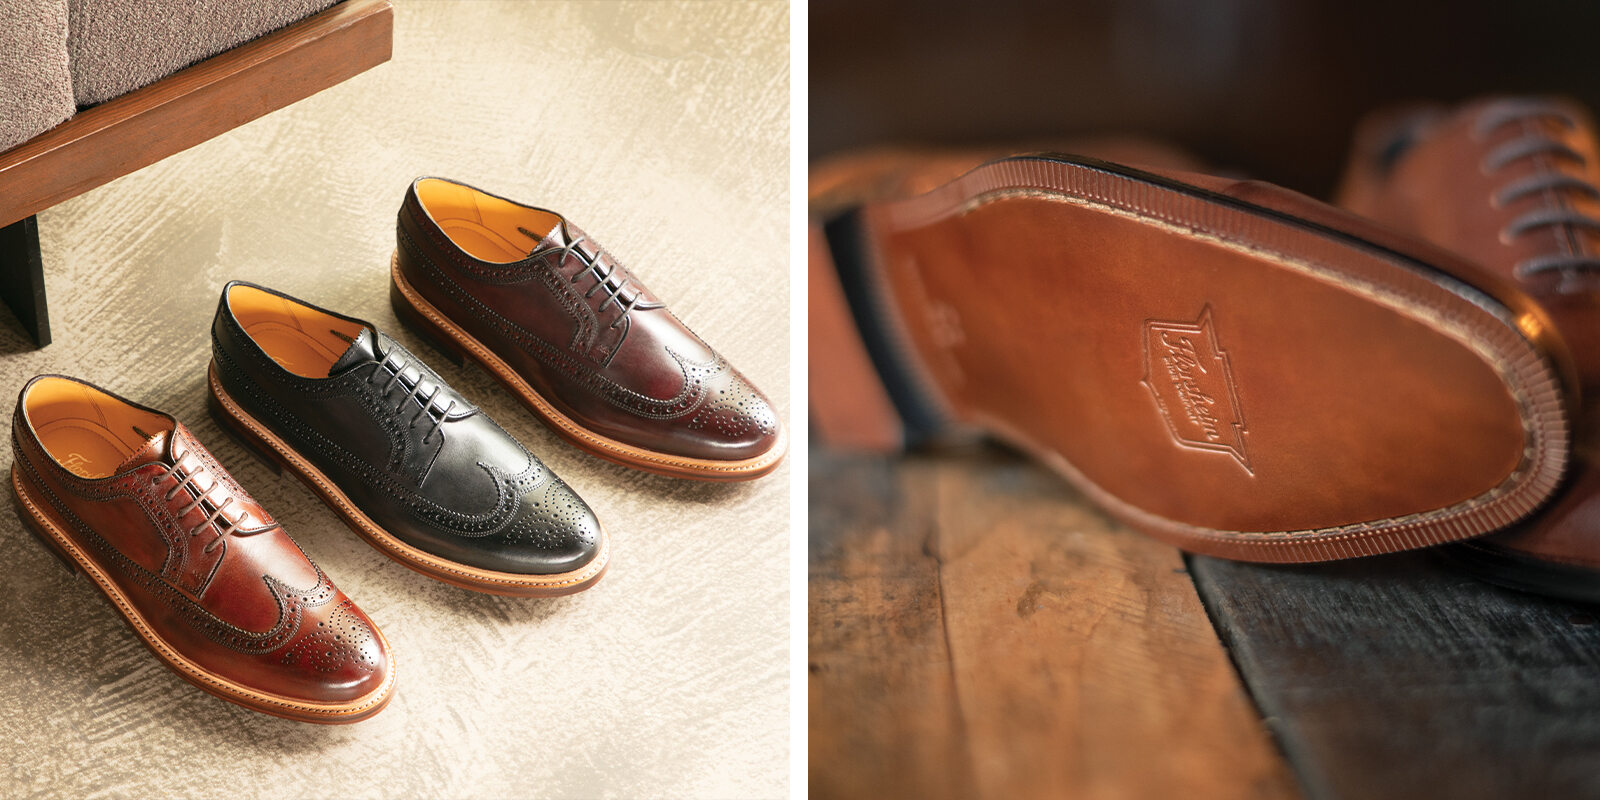 Goodyear Welt: Why It's Worth The 